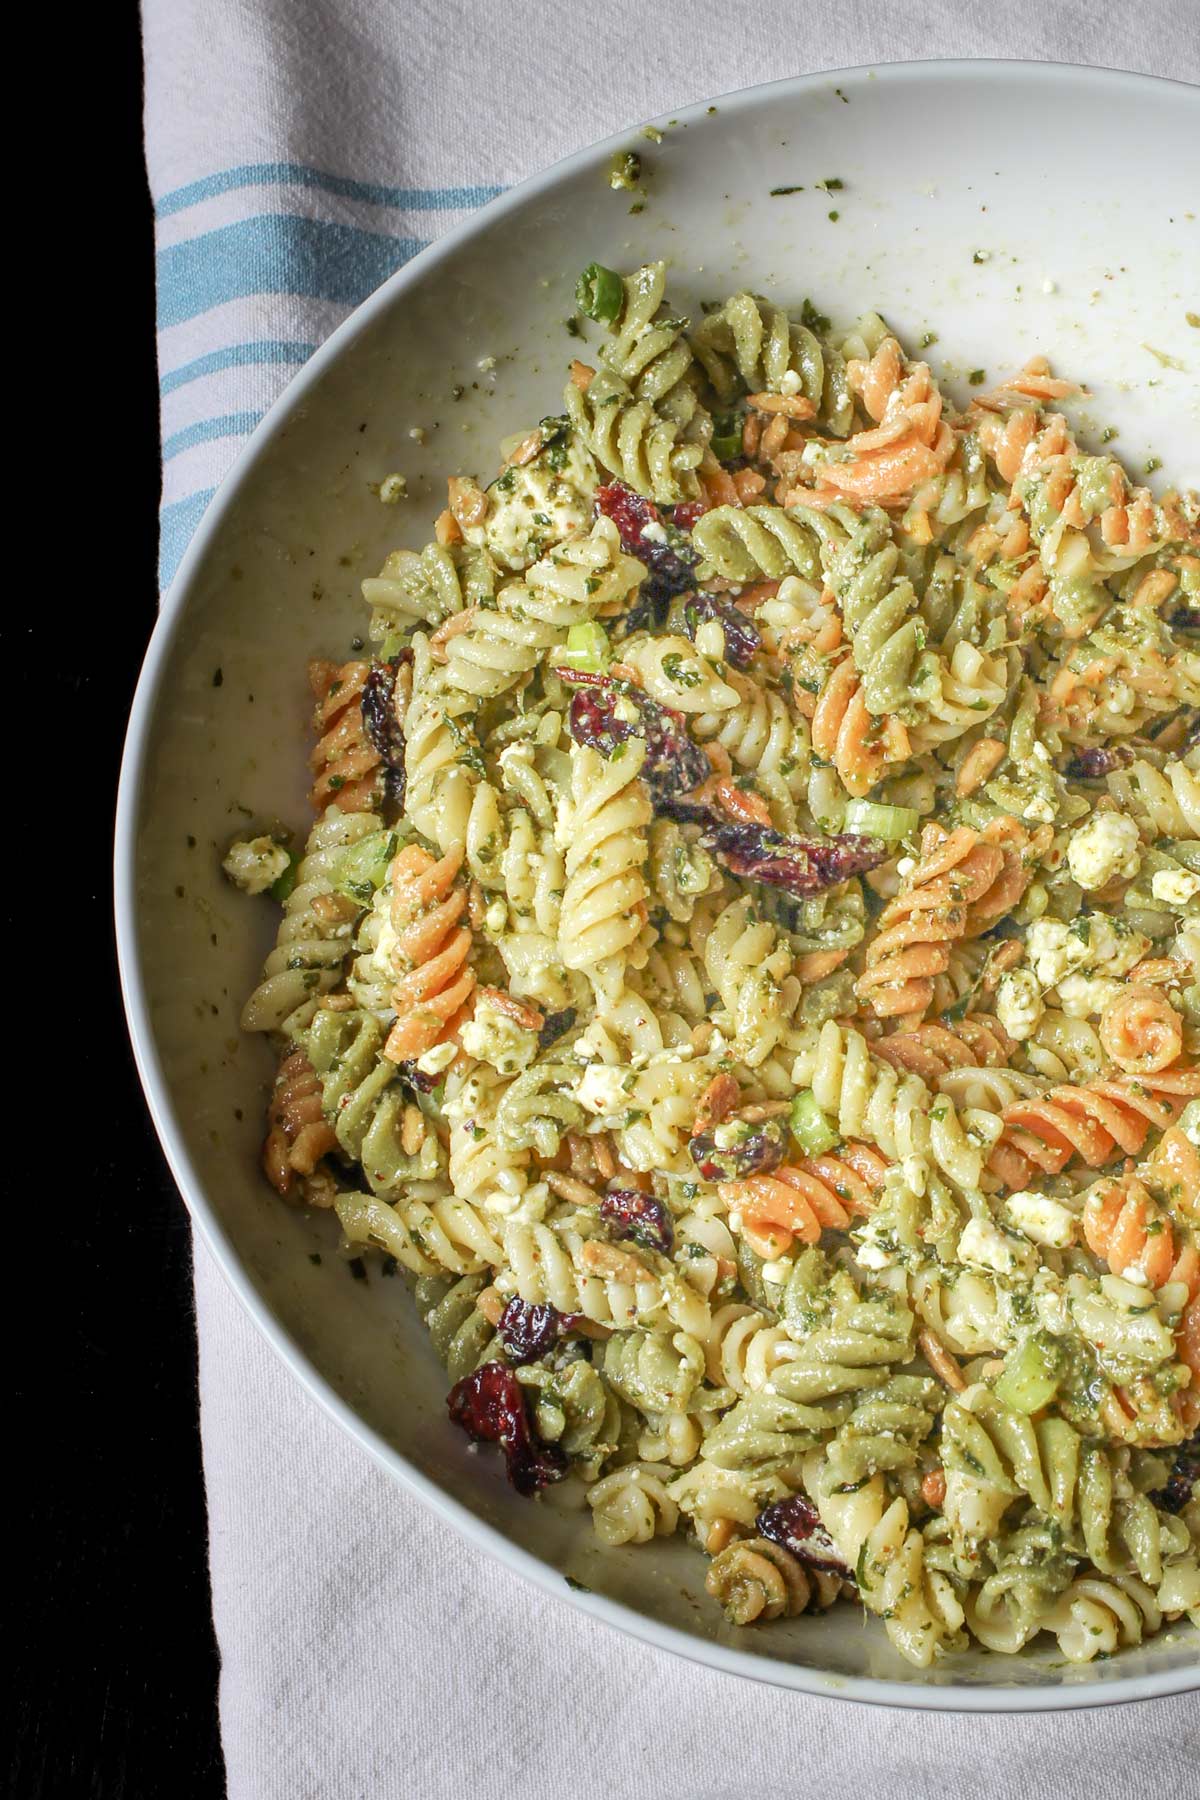 close-up view of pesto pasta salad in large white bowl on blue striped cloth.